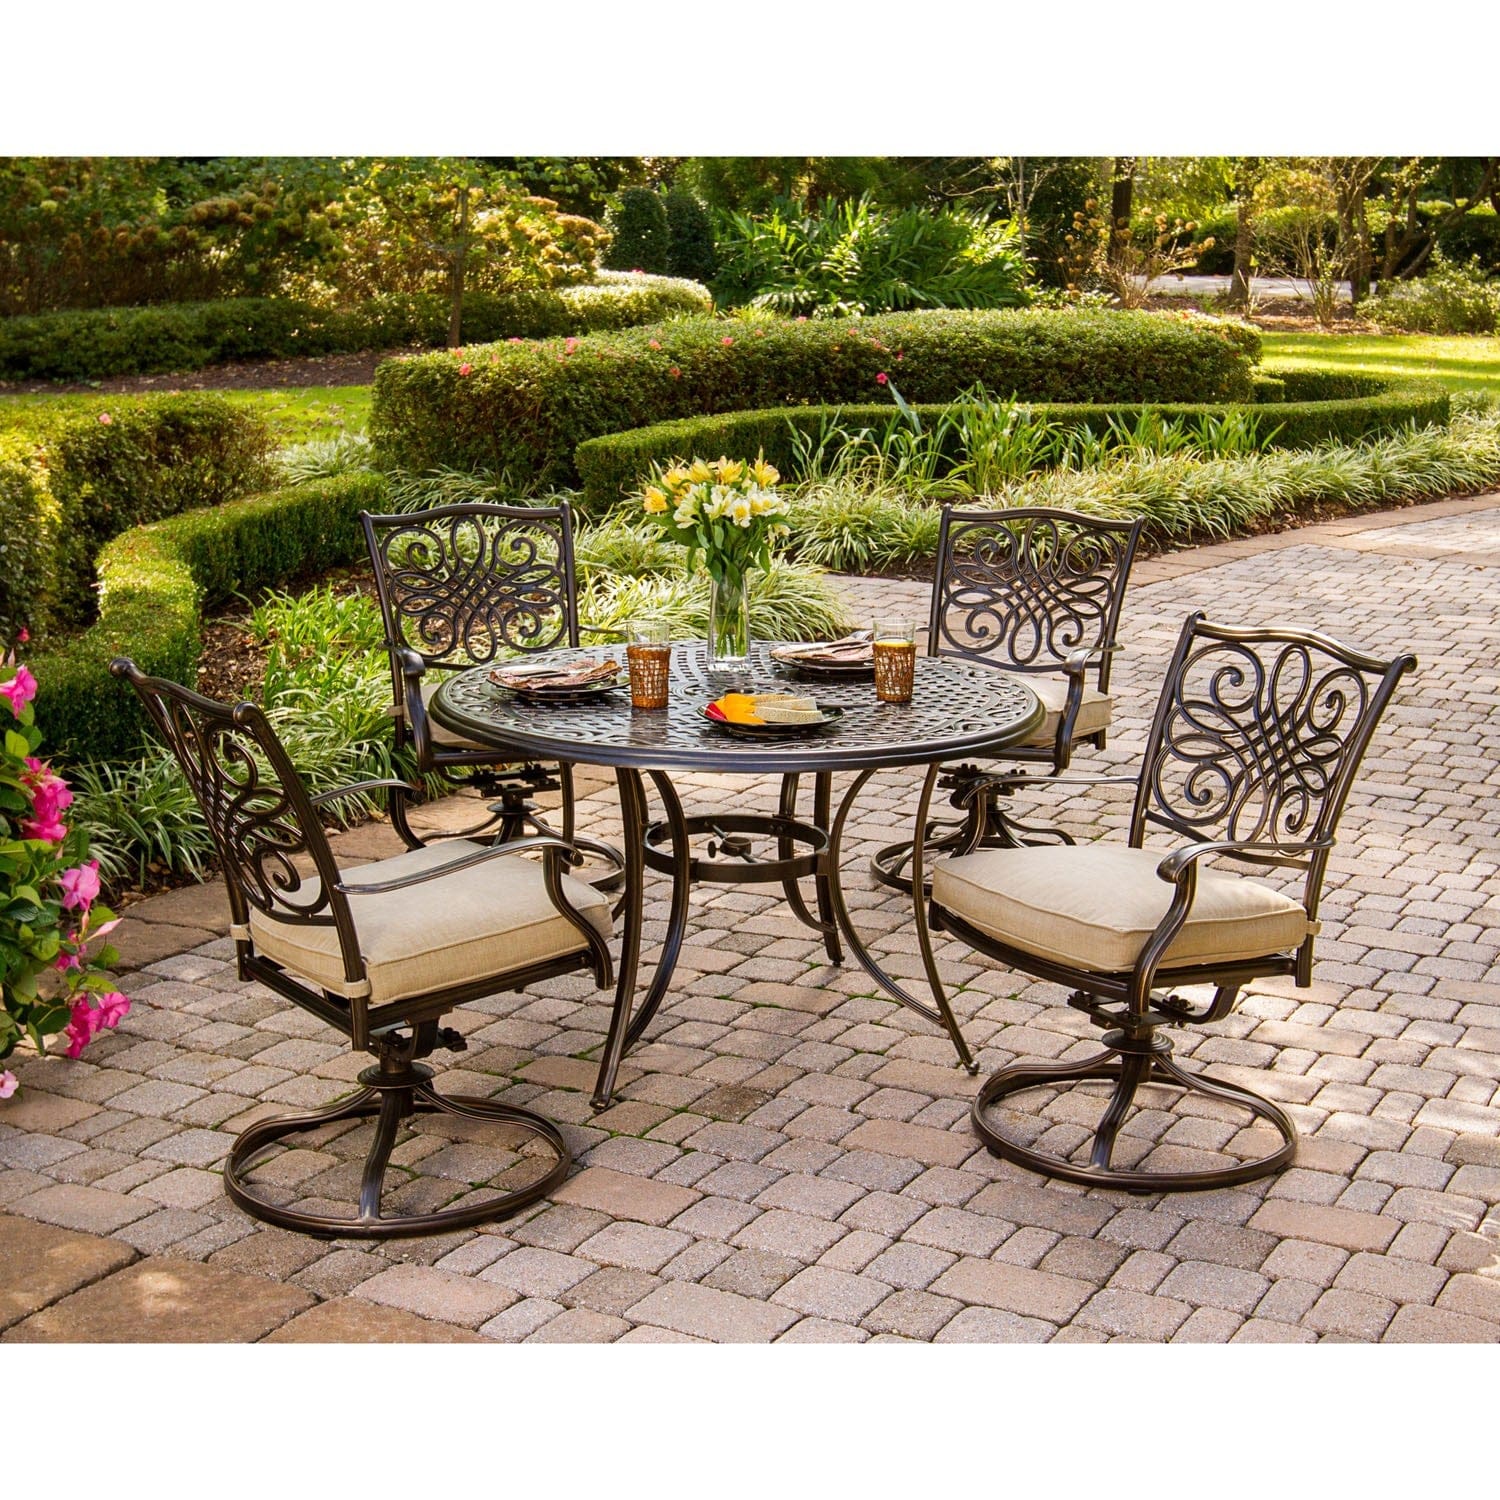 Hanover Outdoor Dining Set Hanover - Traditions 5-Piece Aluminium Frame Dining Set with Four Swivel Rockers and a 48 in. Round Table - TRADITIONS5PCSW